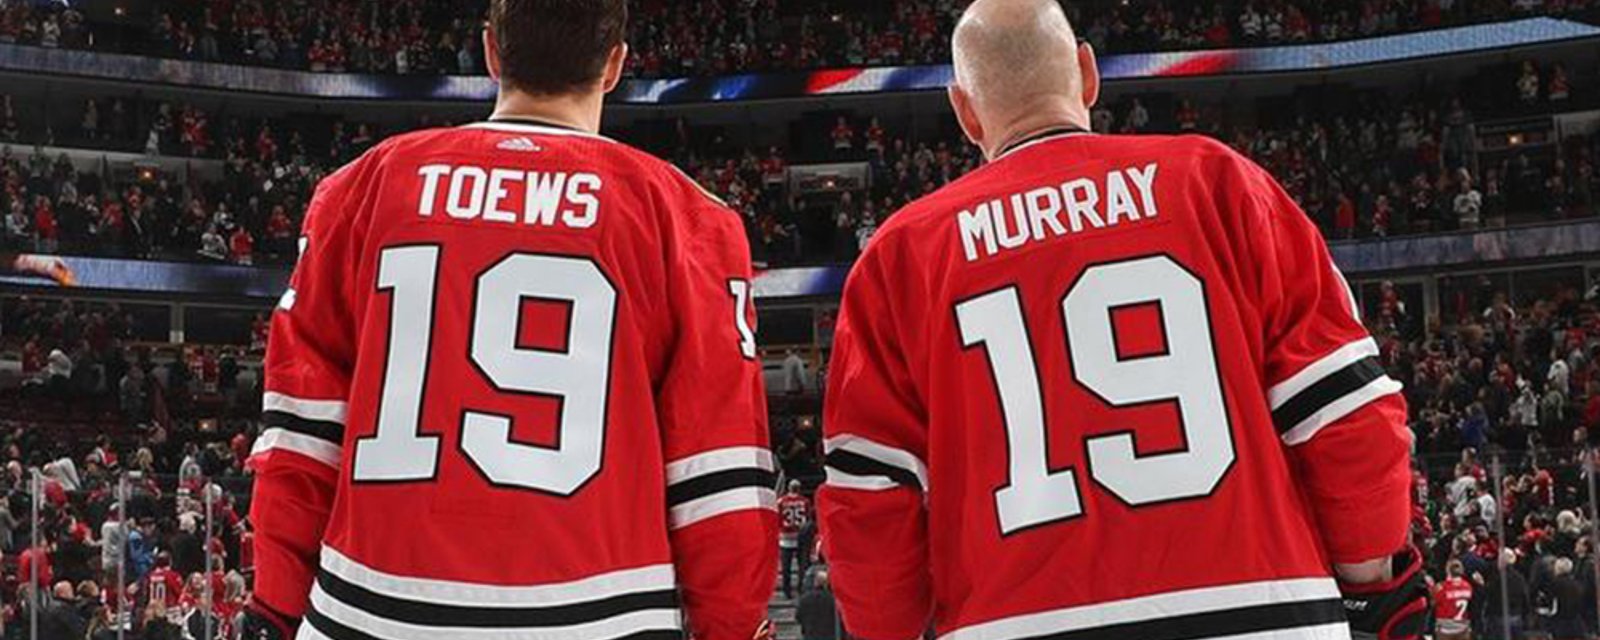 Former Blackhawks player turned broadcaster Troy Murray diagnosed with cancer